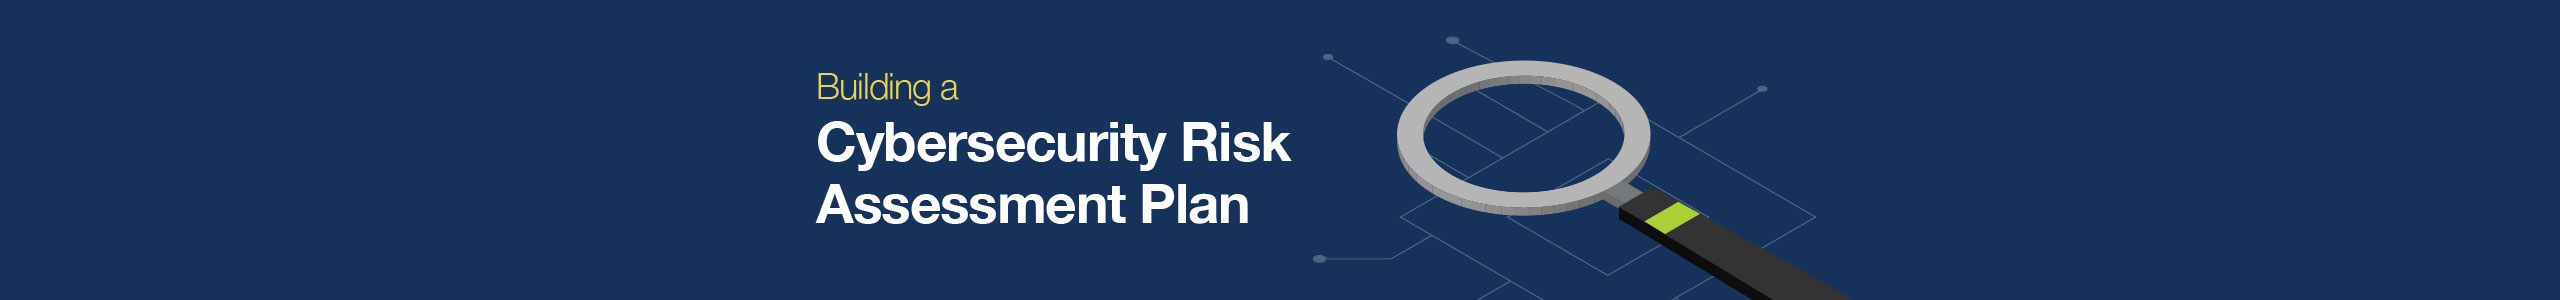 building_cybersecurity_risk_assessment_plan_e_book_landing_page